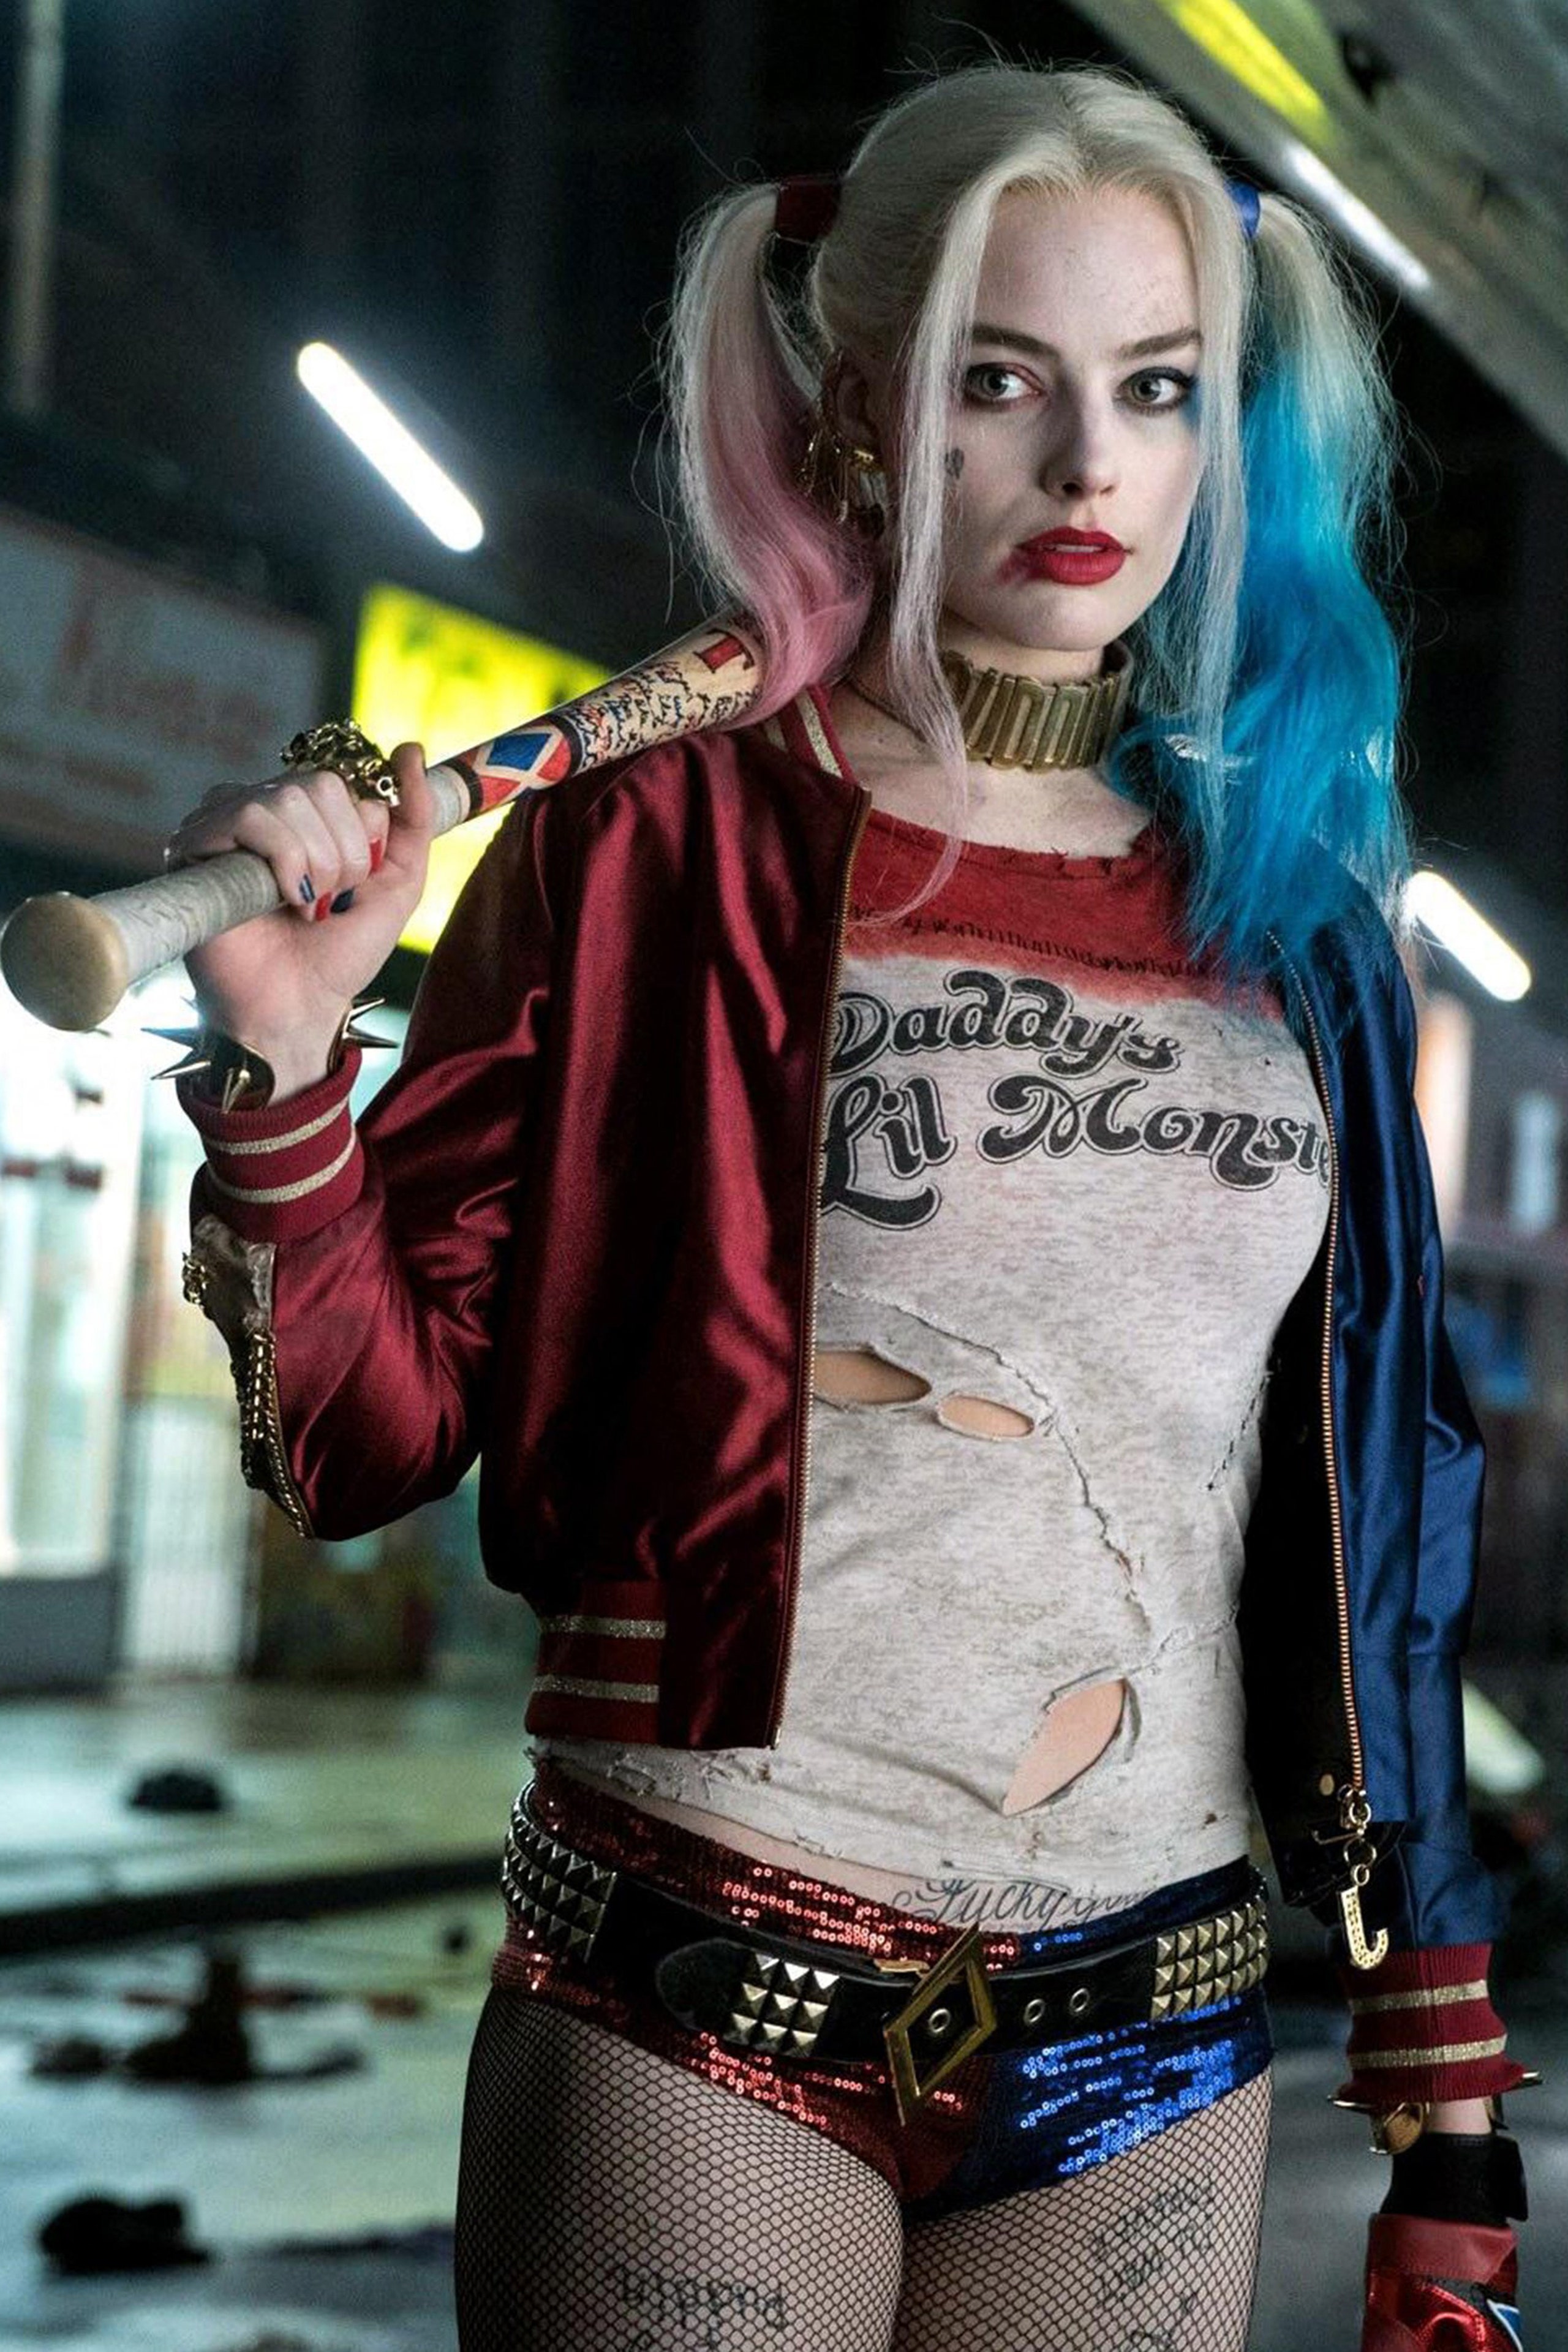 dennis tsoi recommends google show me a picture of harley quinn pic